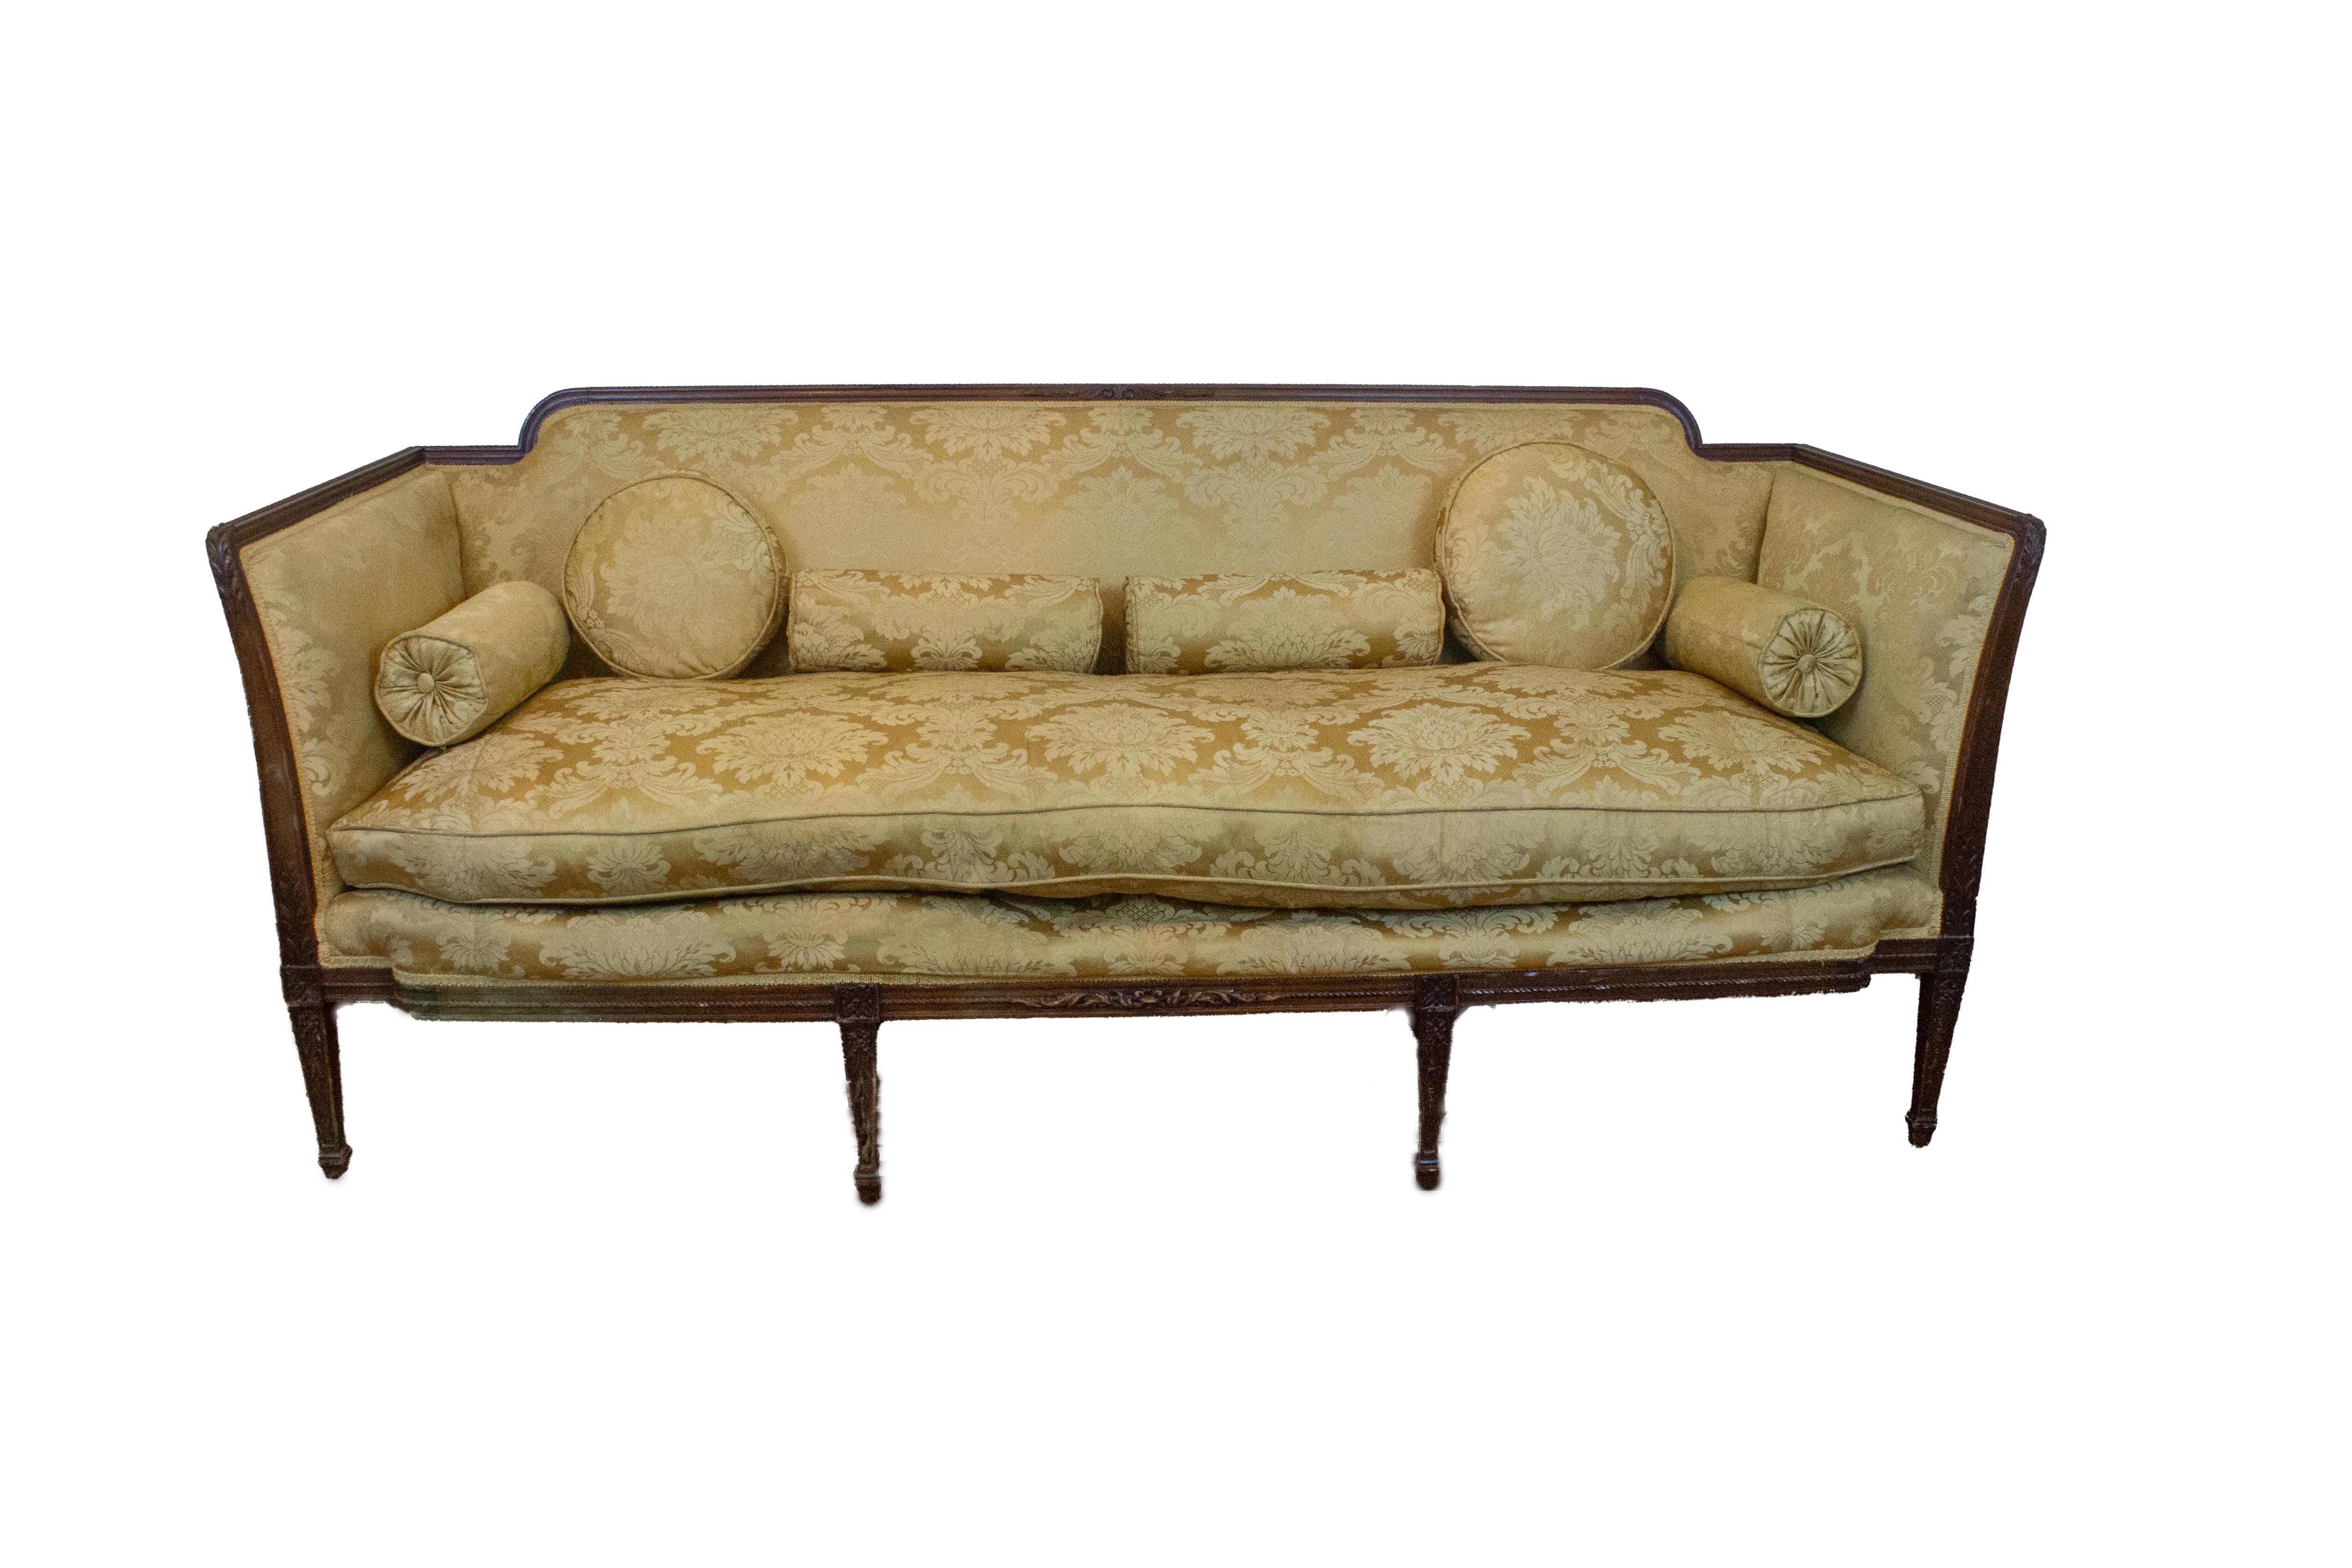 19th century Regency sofa with gold damask upholstery and hand-carved mahogany. 

The sofa was created in America and is exemplary of the classic regency style. The upholstery is a gold charmeuse satin damask textile and the square tapered legs